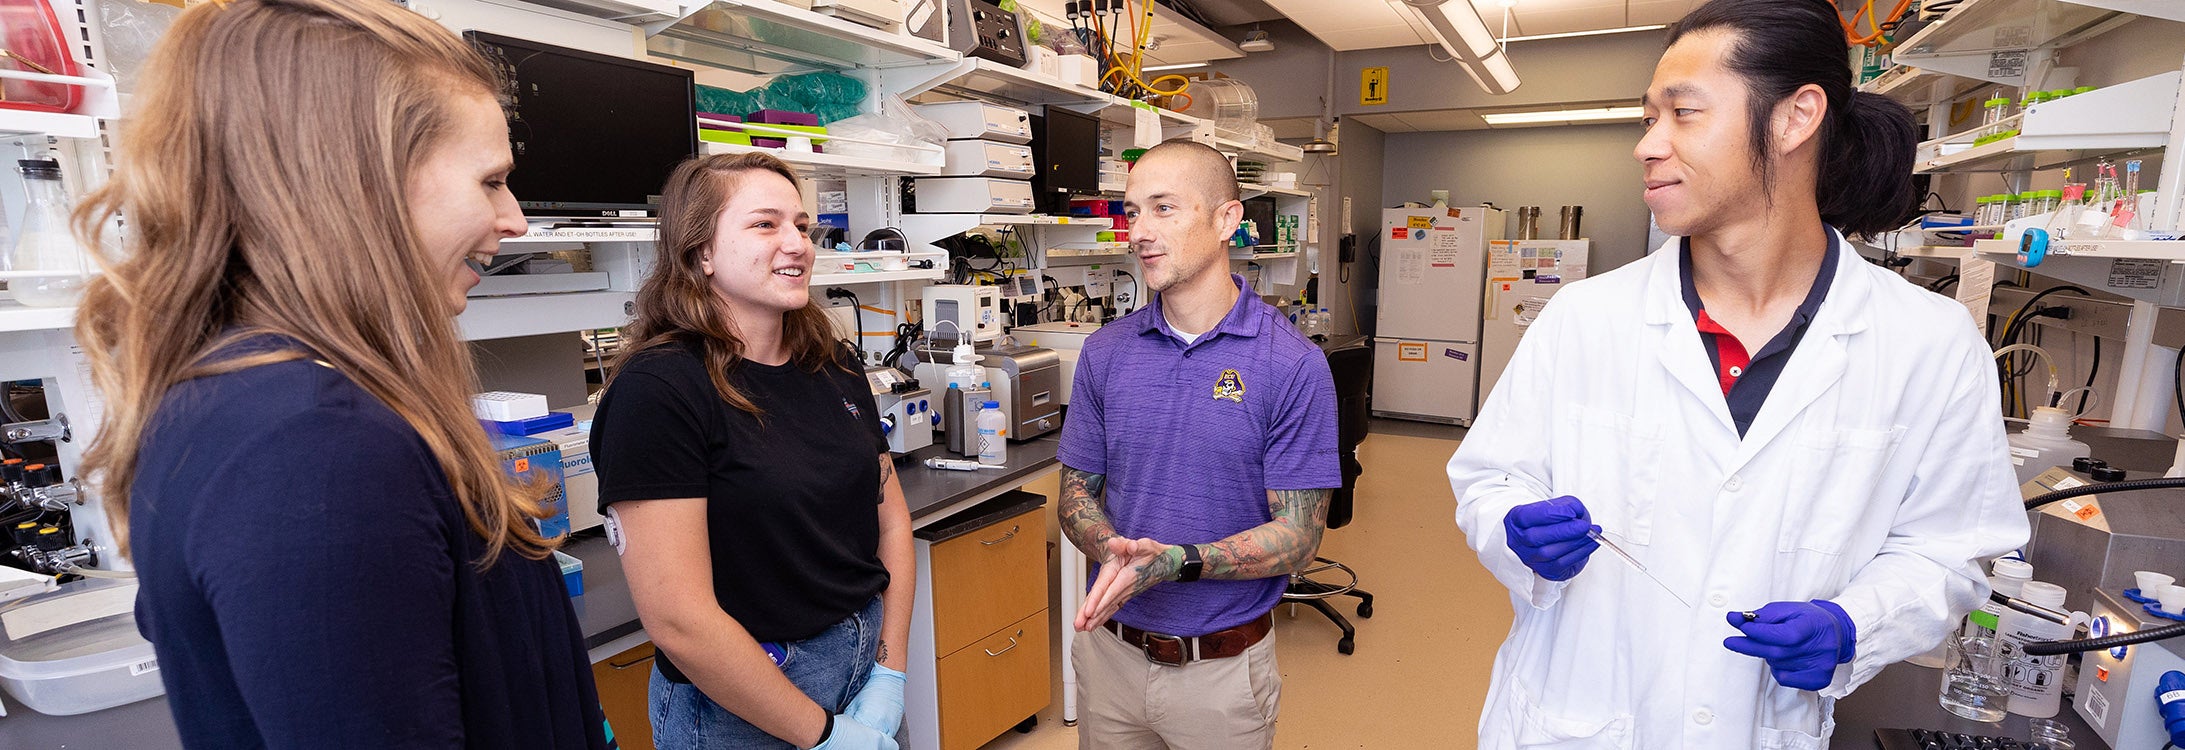 One benefit of the record sponsored activities funding is the chance for students to participate in faculty-led research projects for hands-on learning. (Photos by News Services)